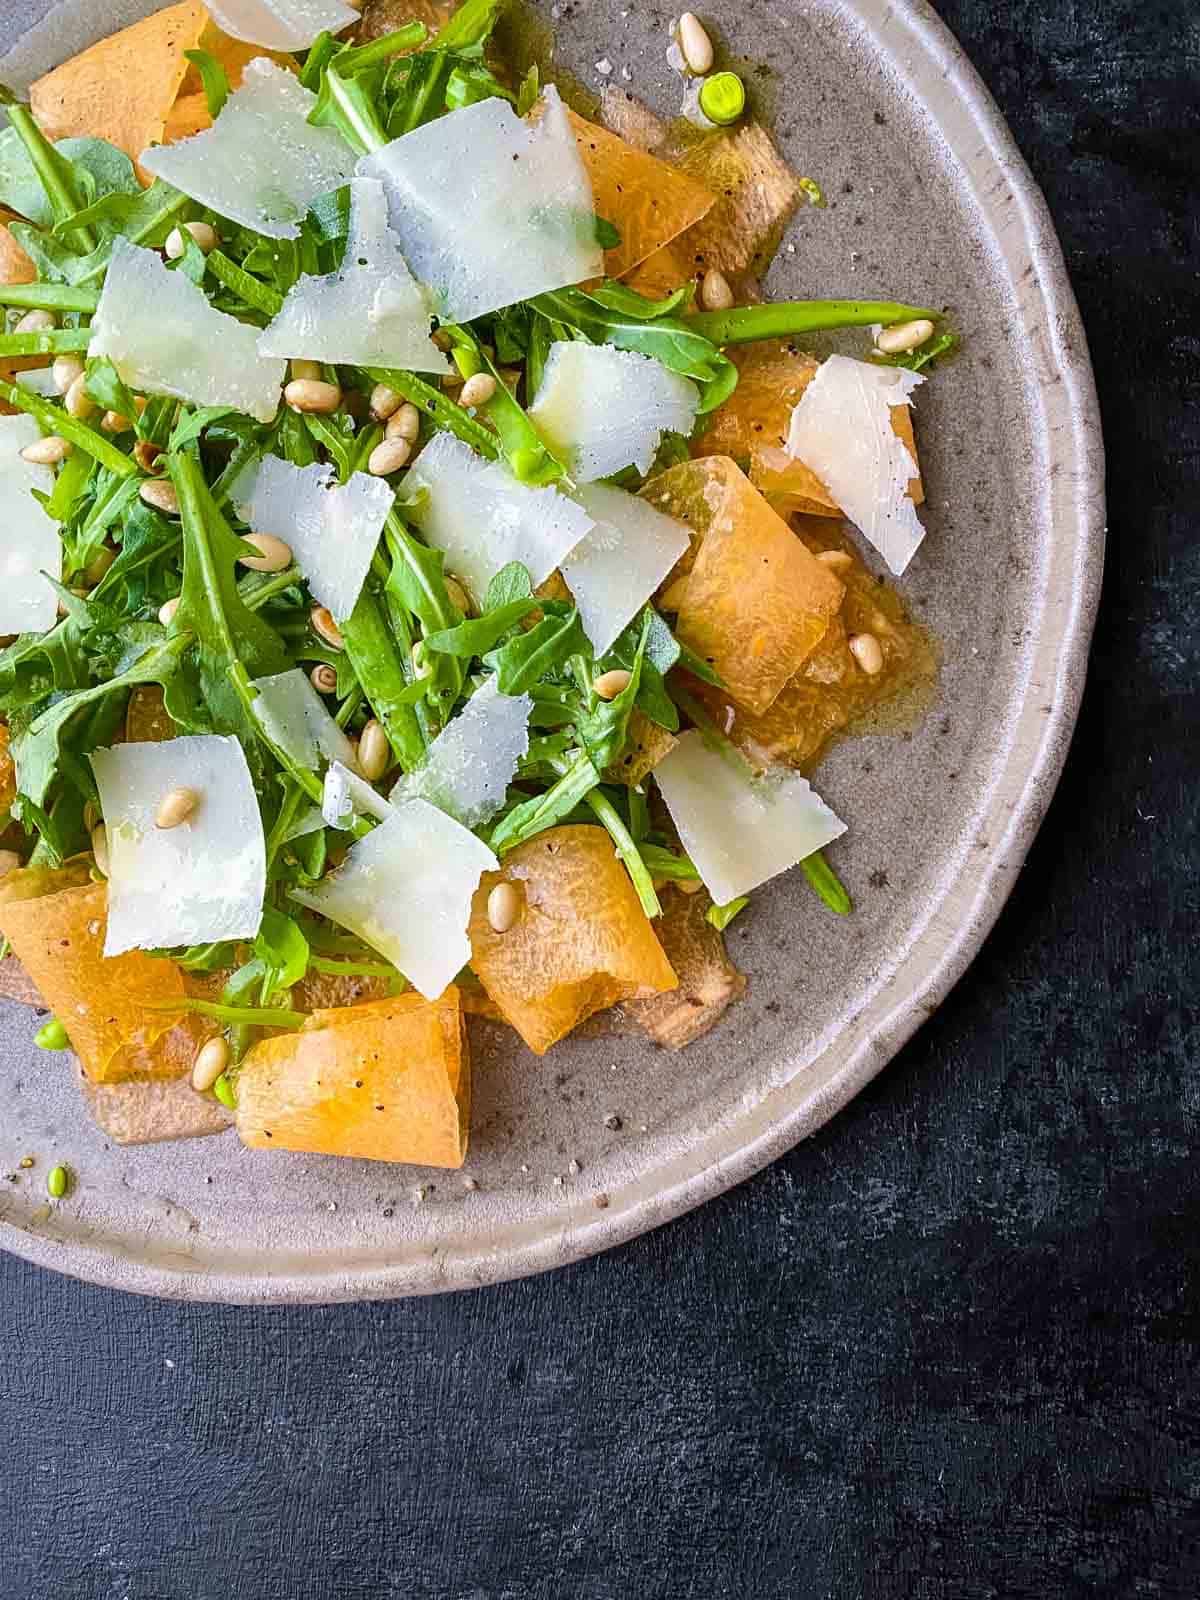 Cantaloupe Salad in a grey plate